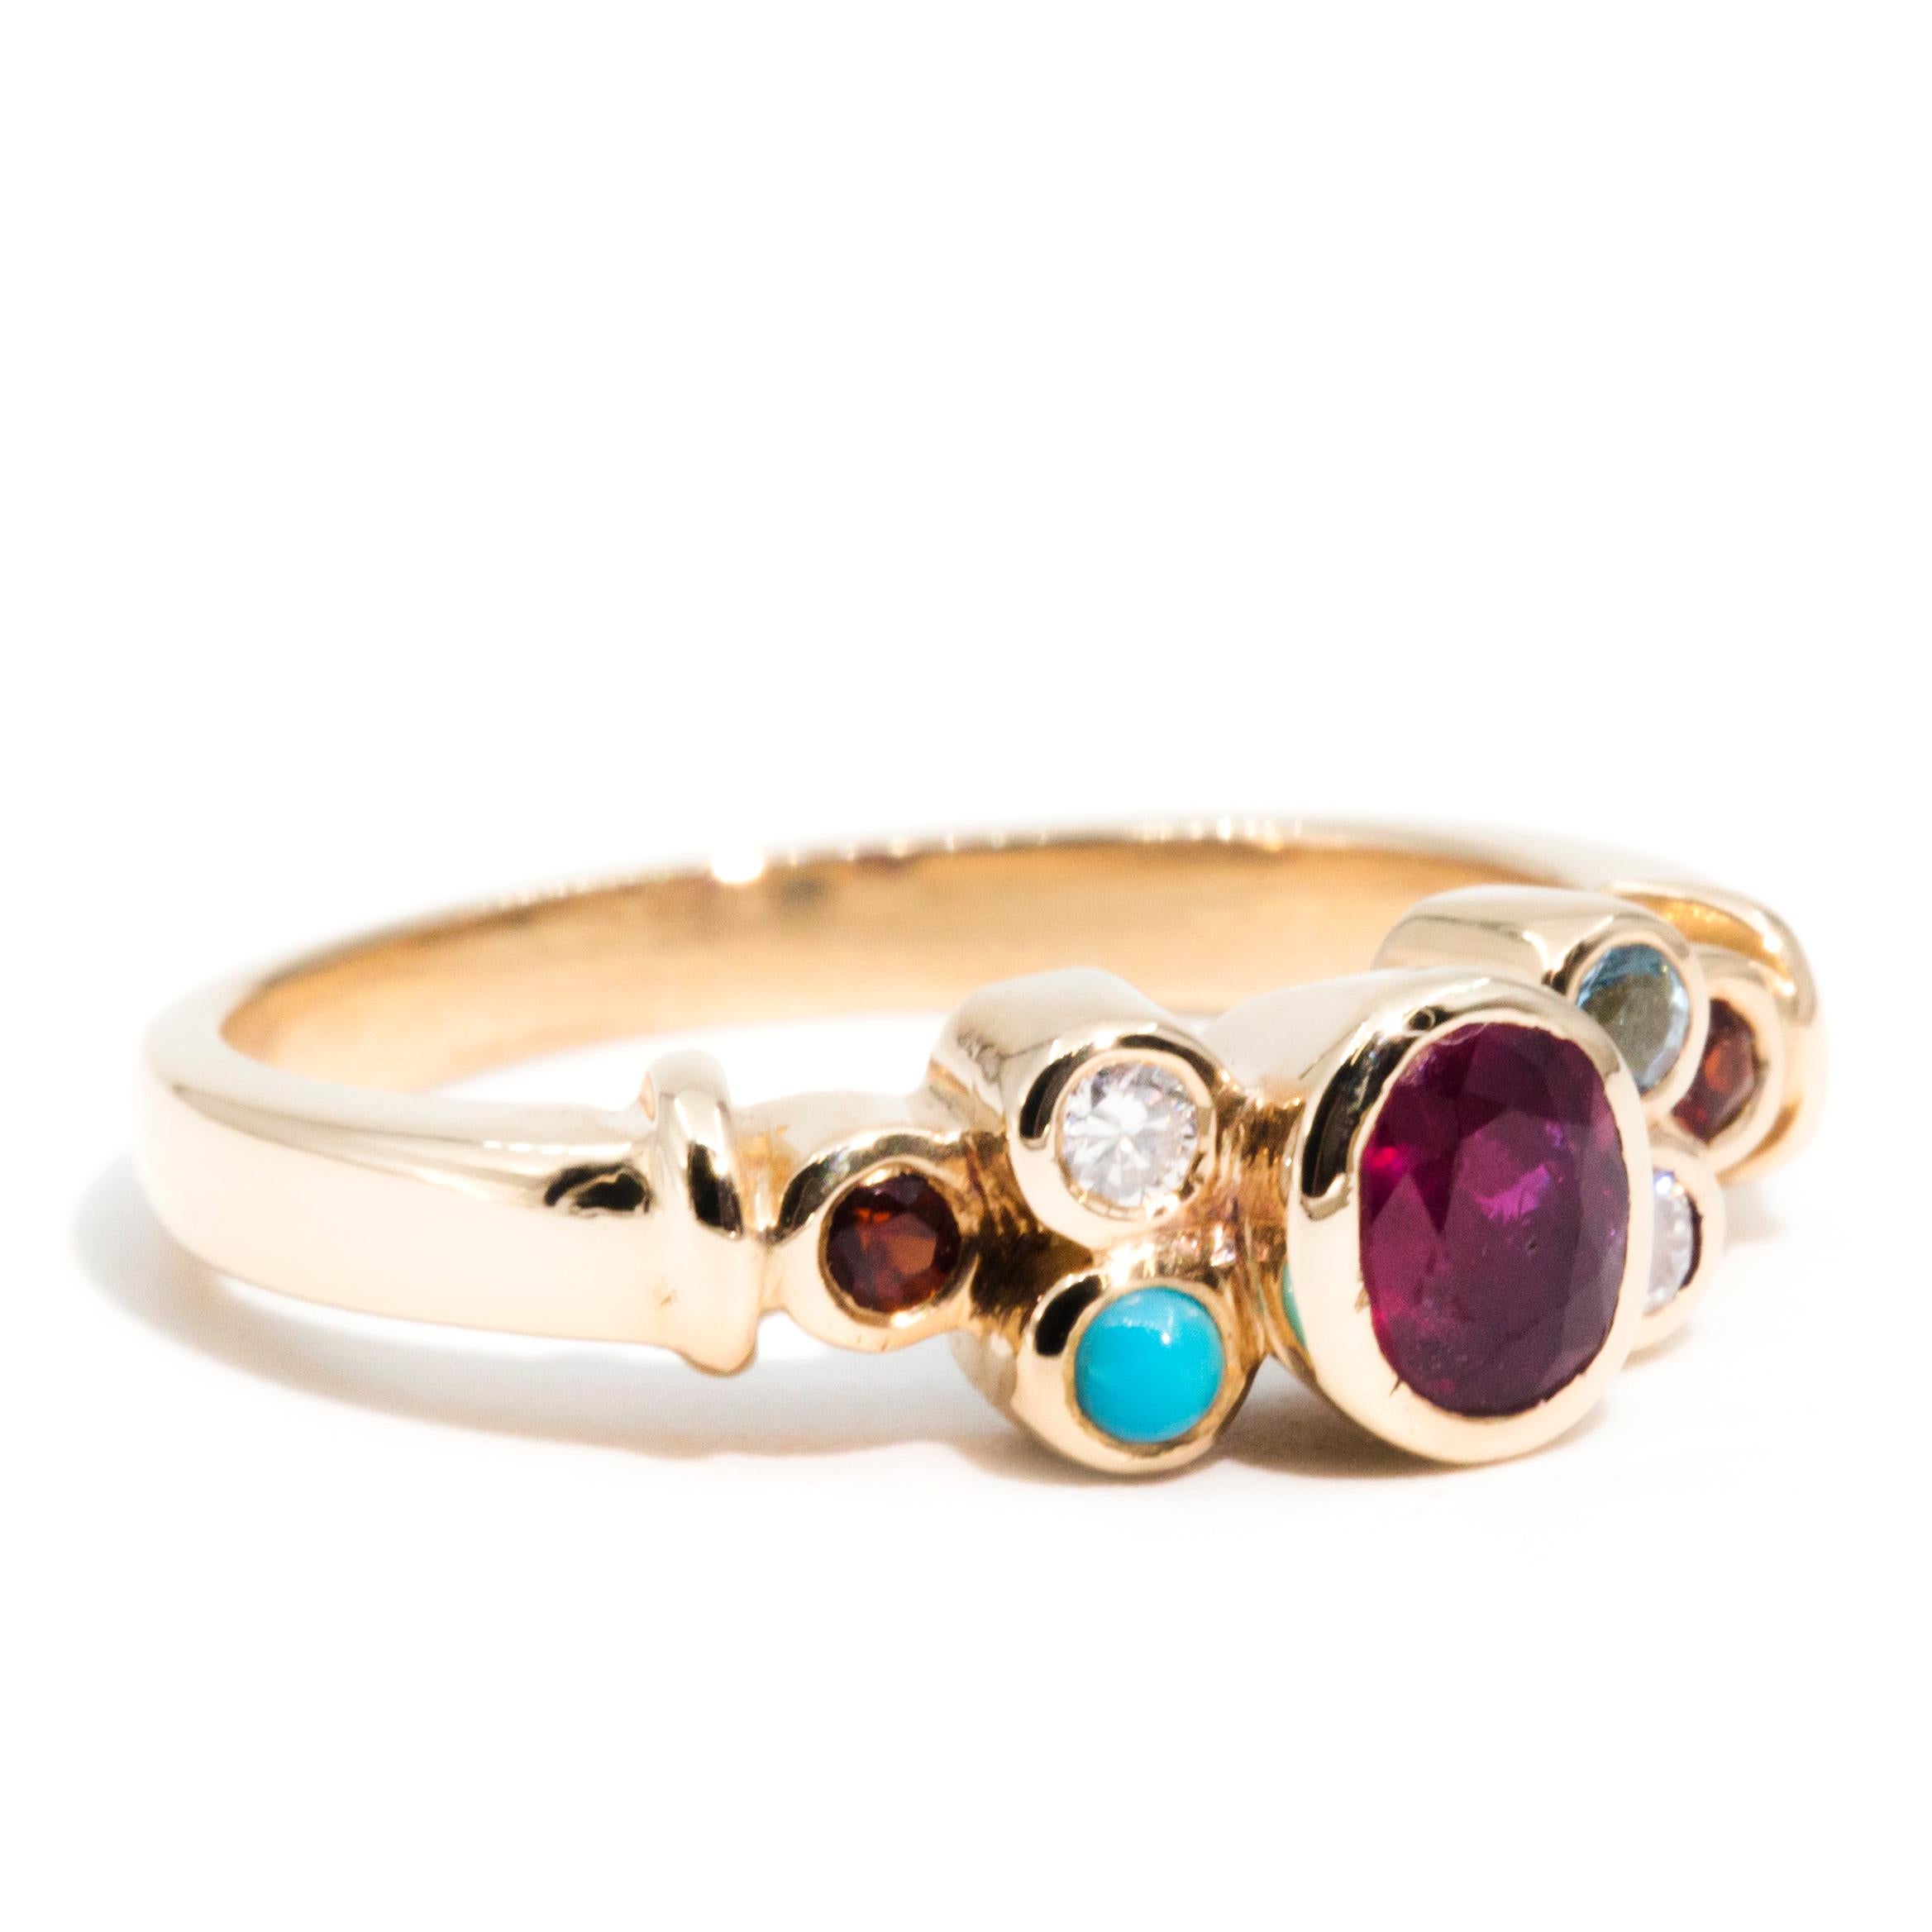 Forged in 18 carat gold, this vibrant vintage ring features a polished band rising into three tiers of gemstone clusters with opulent turquoises, garnets, aquamarines, and sapphires. At the centre is an alluring 0.41 carat oval faceted deep red